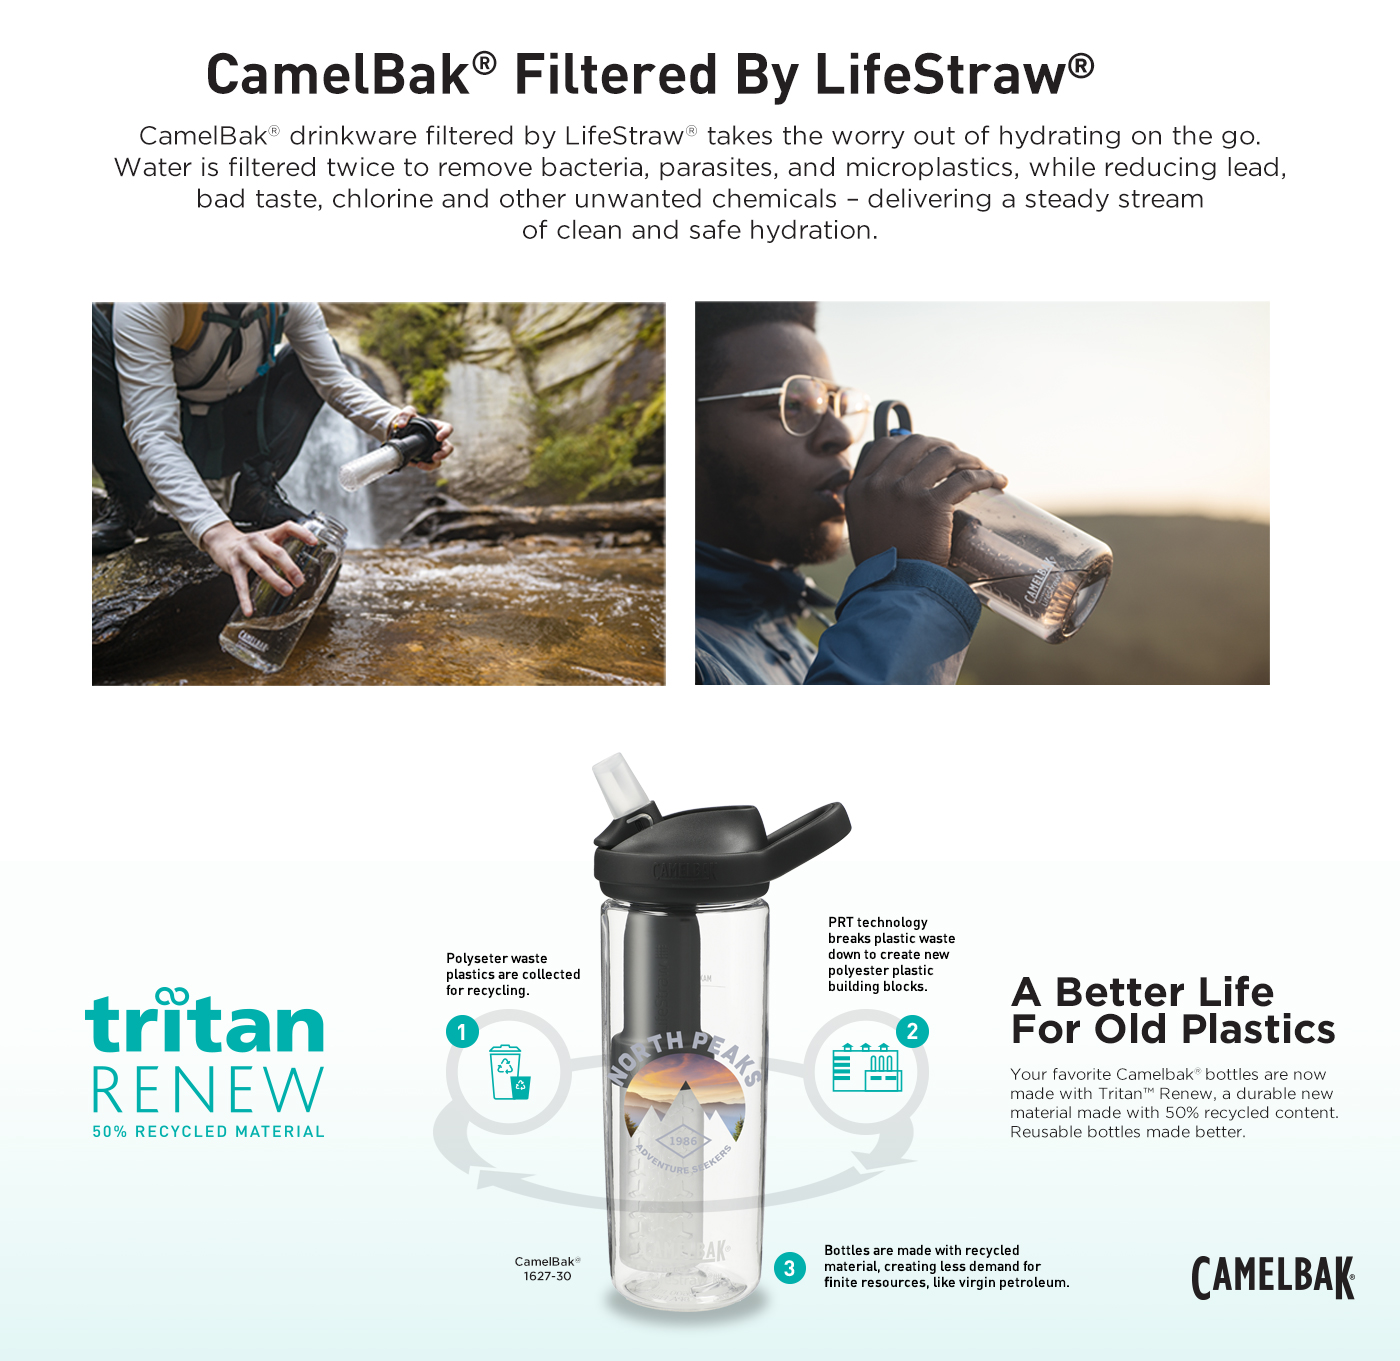 CamelBak Filtered By LifeStraw (1627-42)